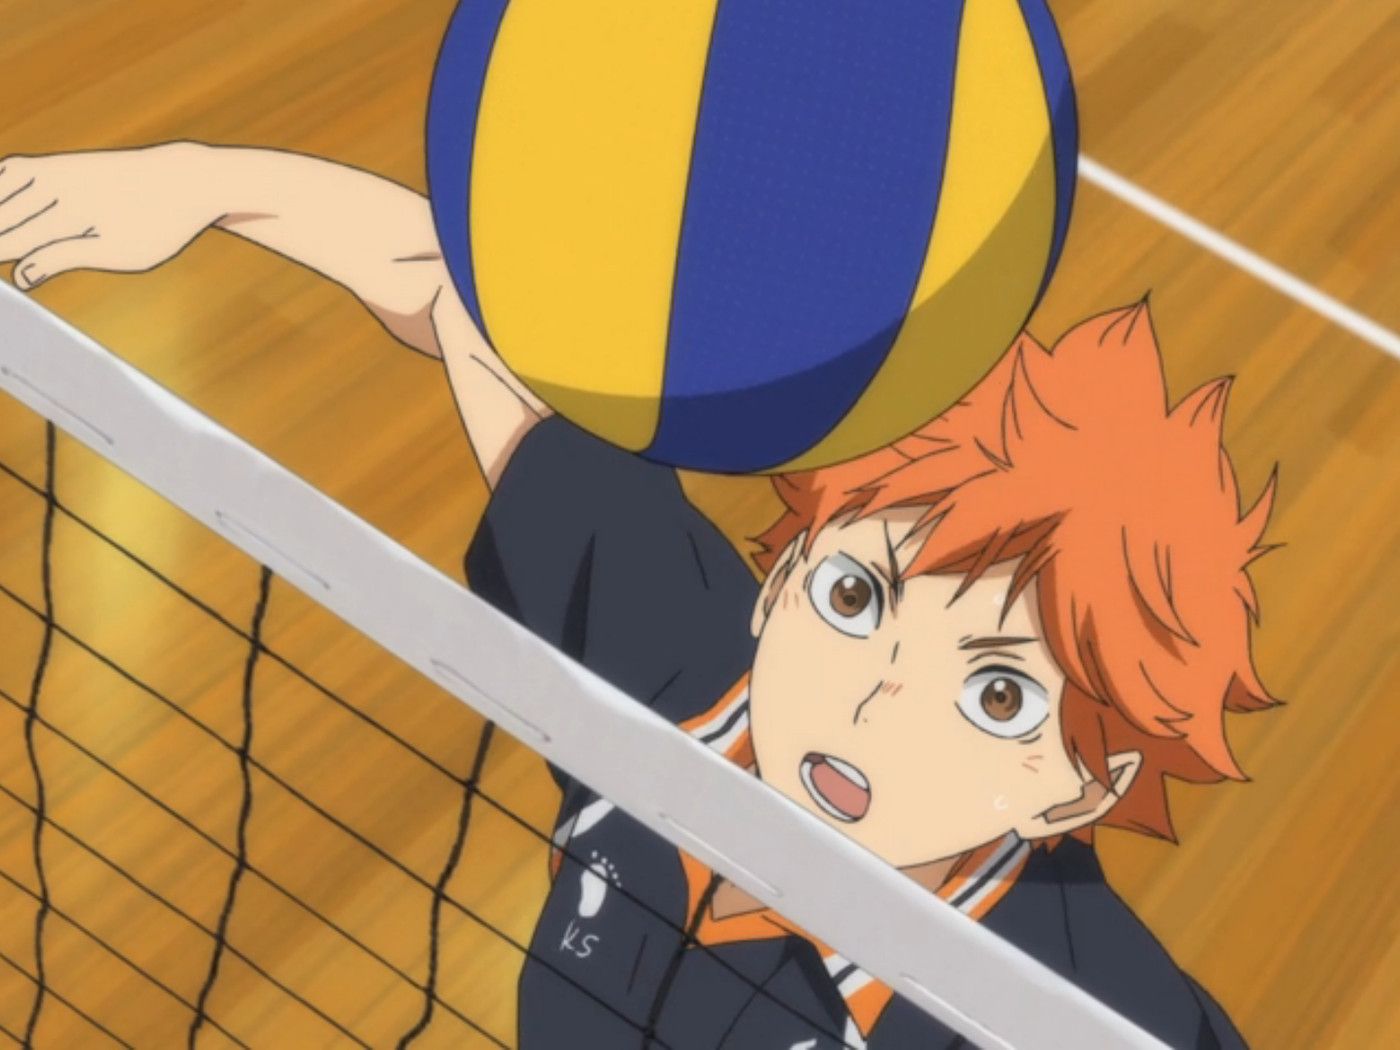 Haikyuu!! helped me understand why people care about sports